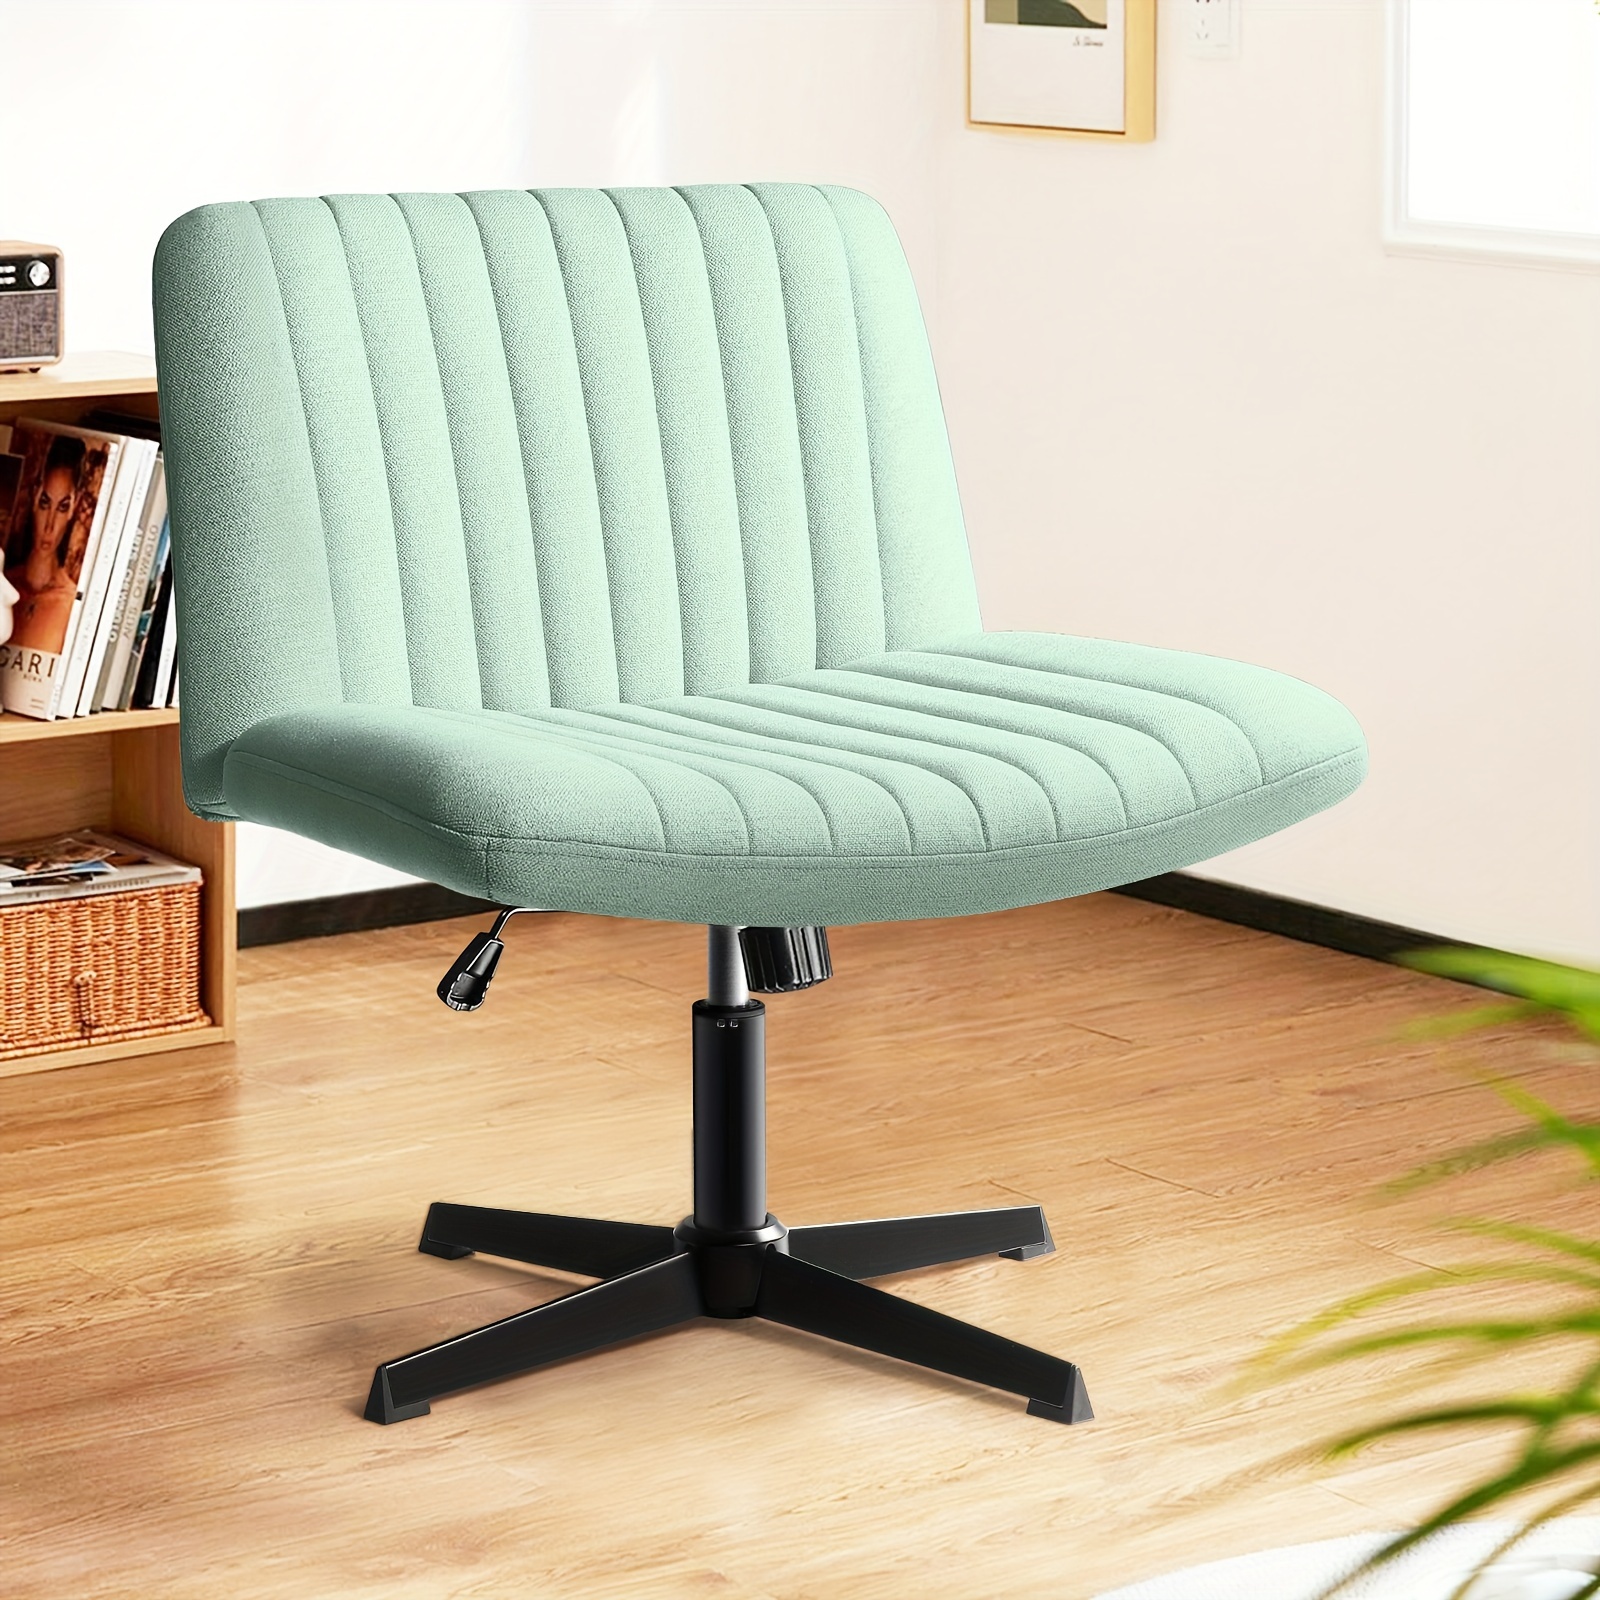 

Lemberi Fabric Padded Desk Chair No Wheels, Armless Wide Swivel Home Office Desk Chair, 120° Rocking Mid Back Ergonomic Computer Task Vanity Chair For Office, Home, Make Up, Small Space (mint Green)